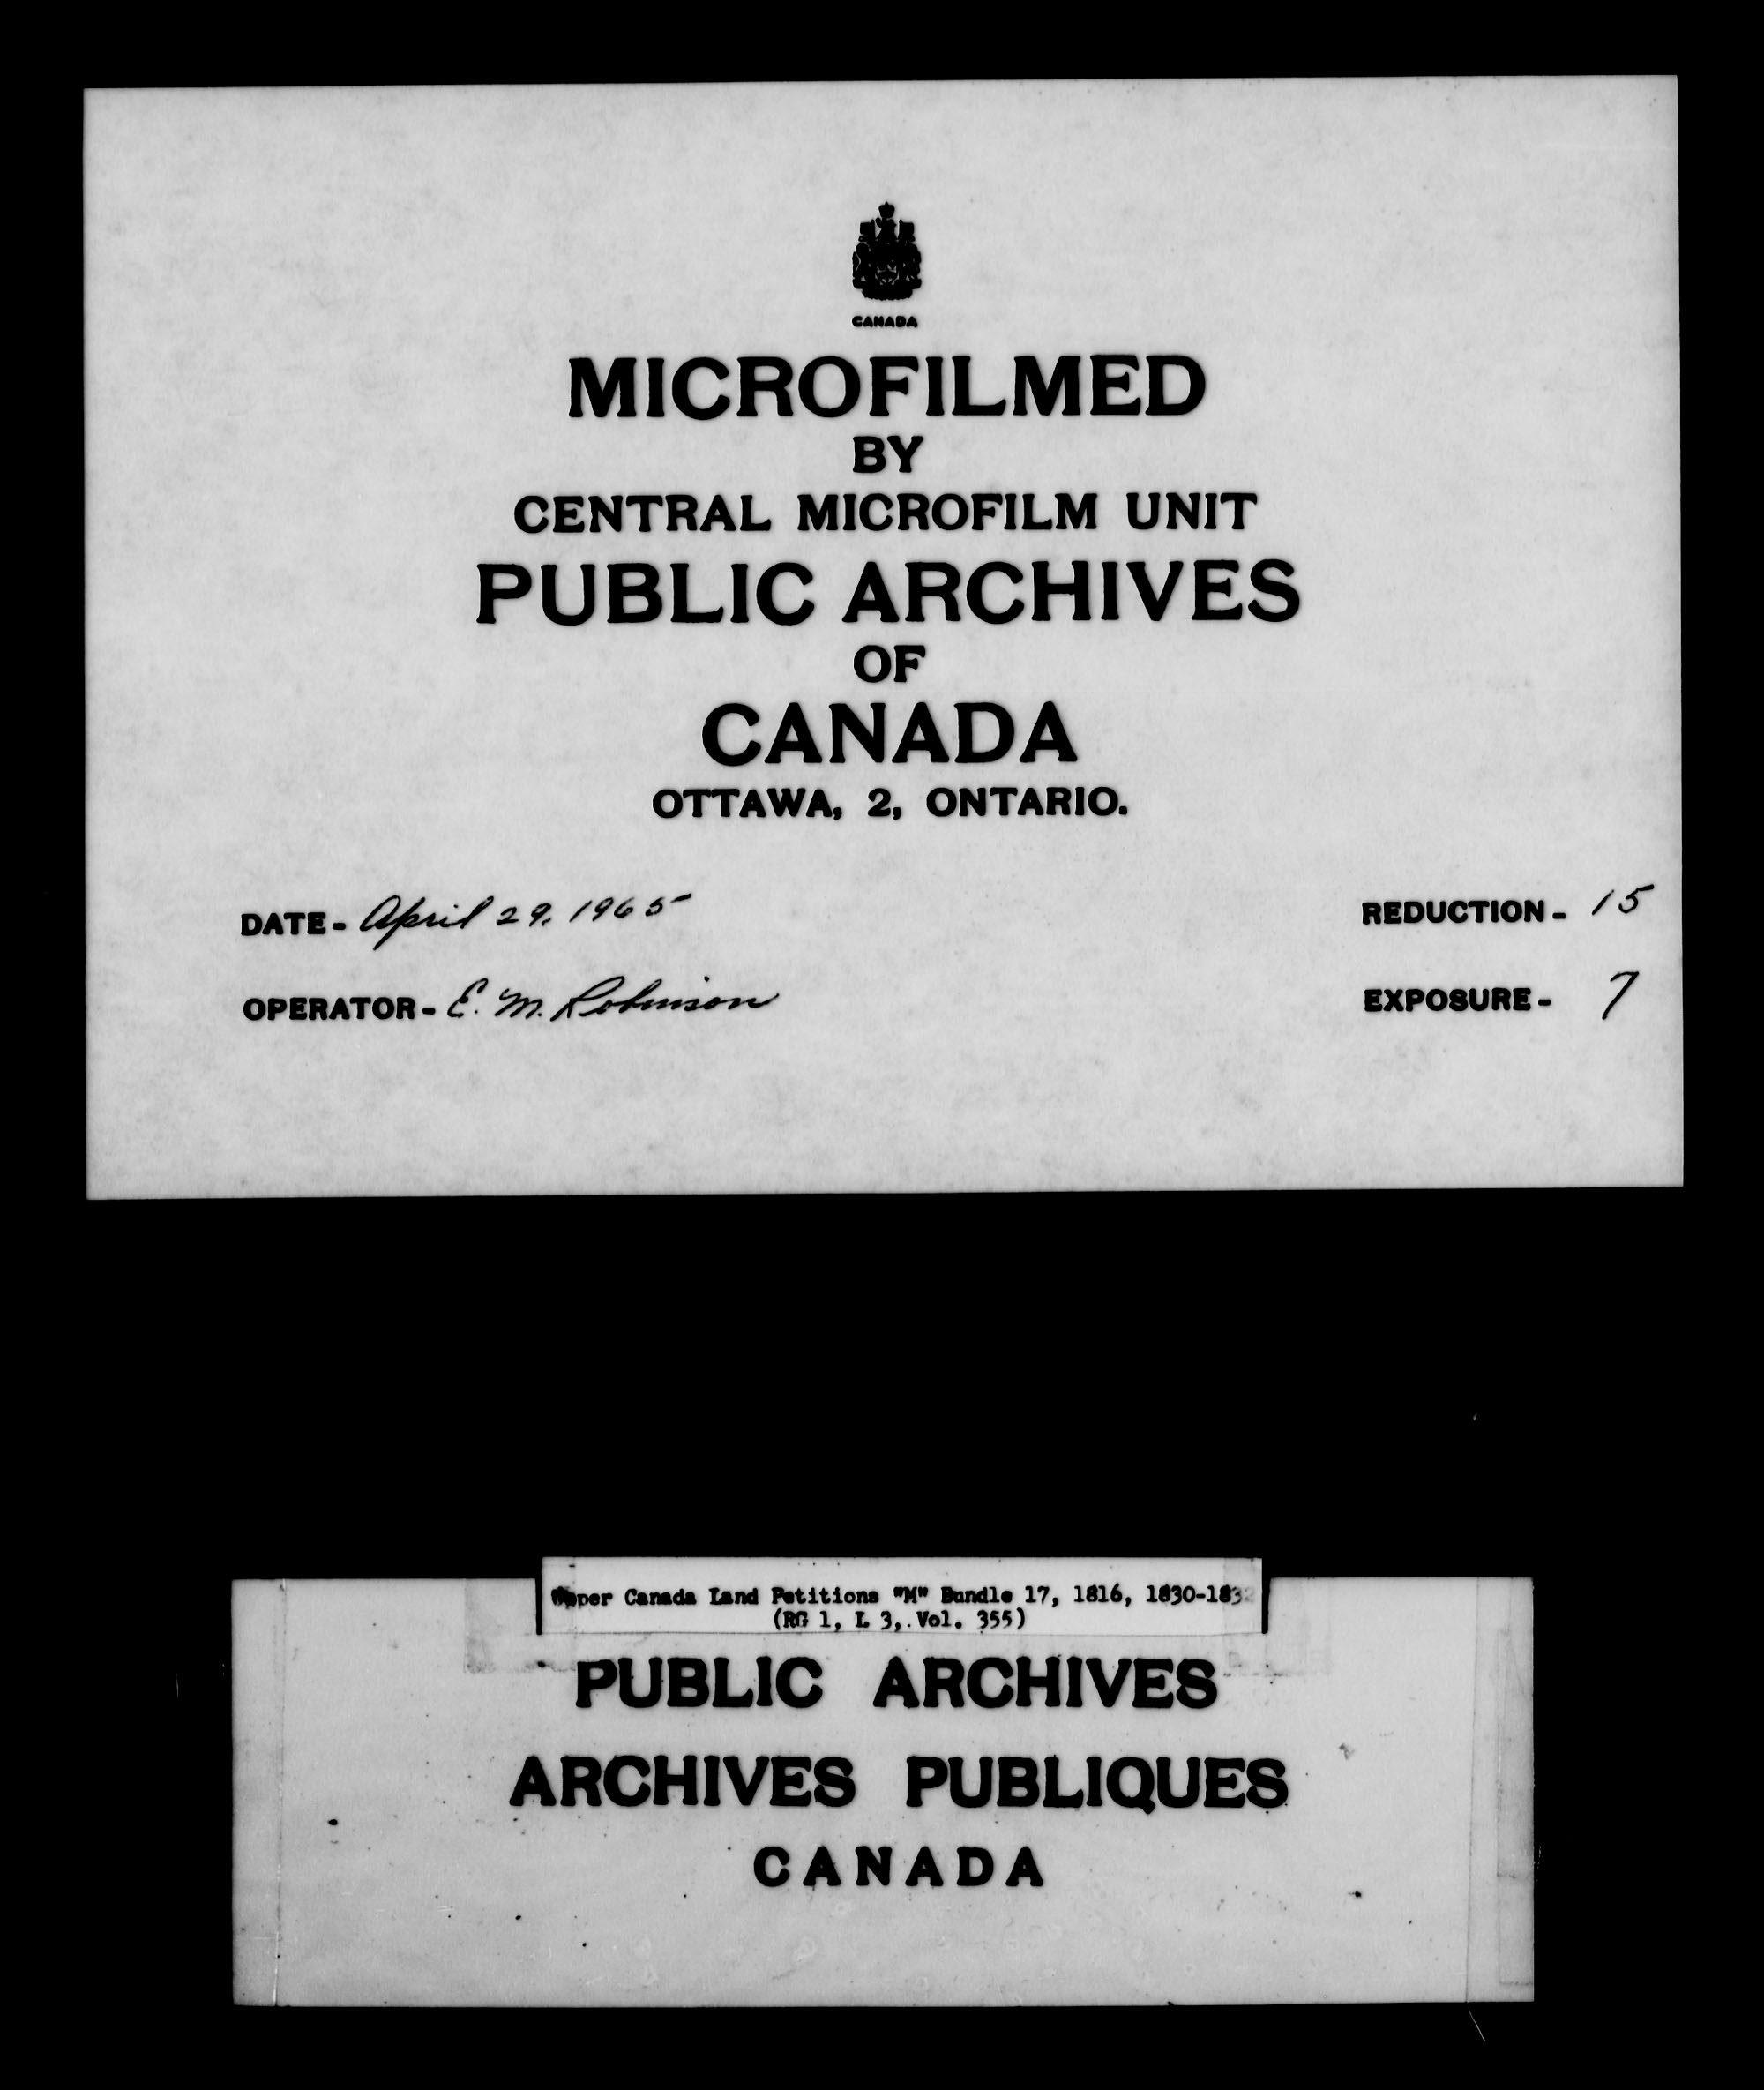 Title: Upper Canada Land Petitions (1763-1865) - Mikan Number: 205131 - Microform: c-2212